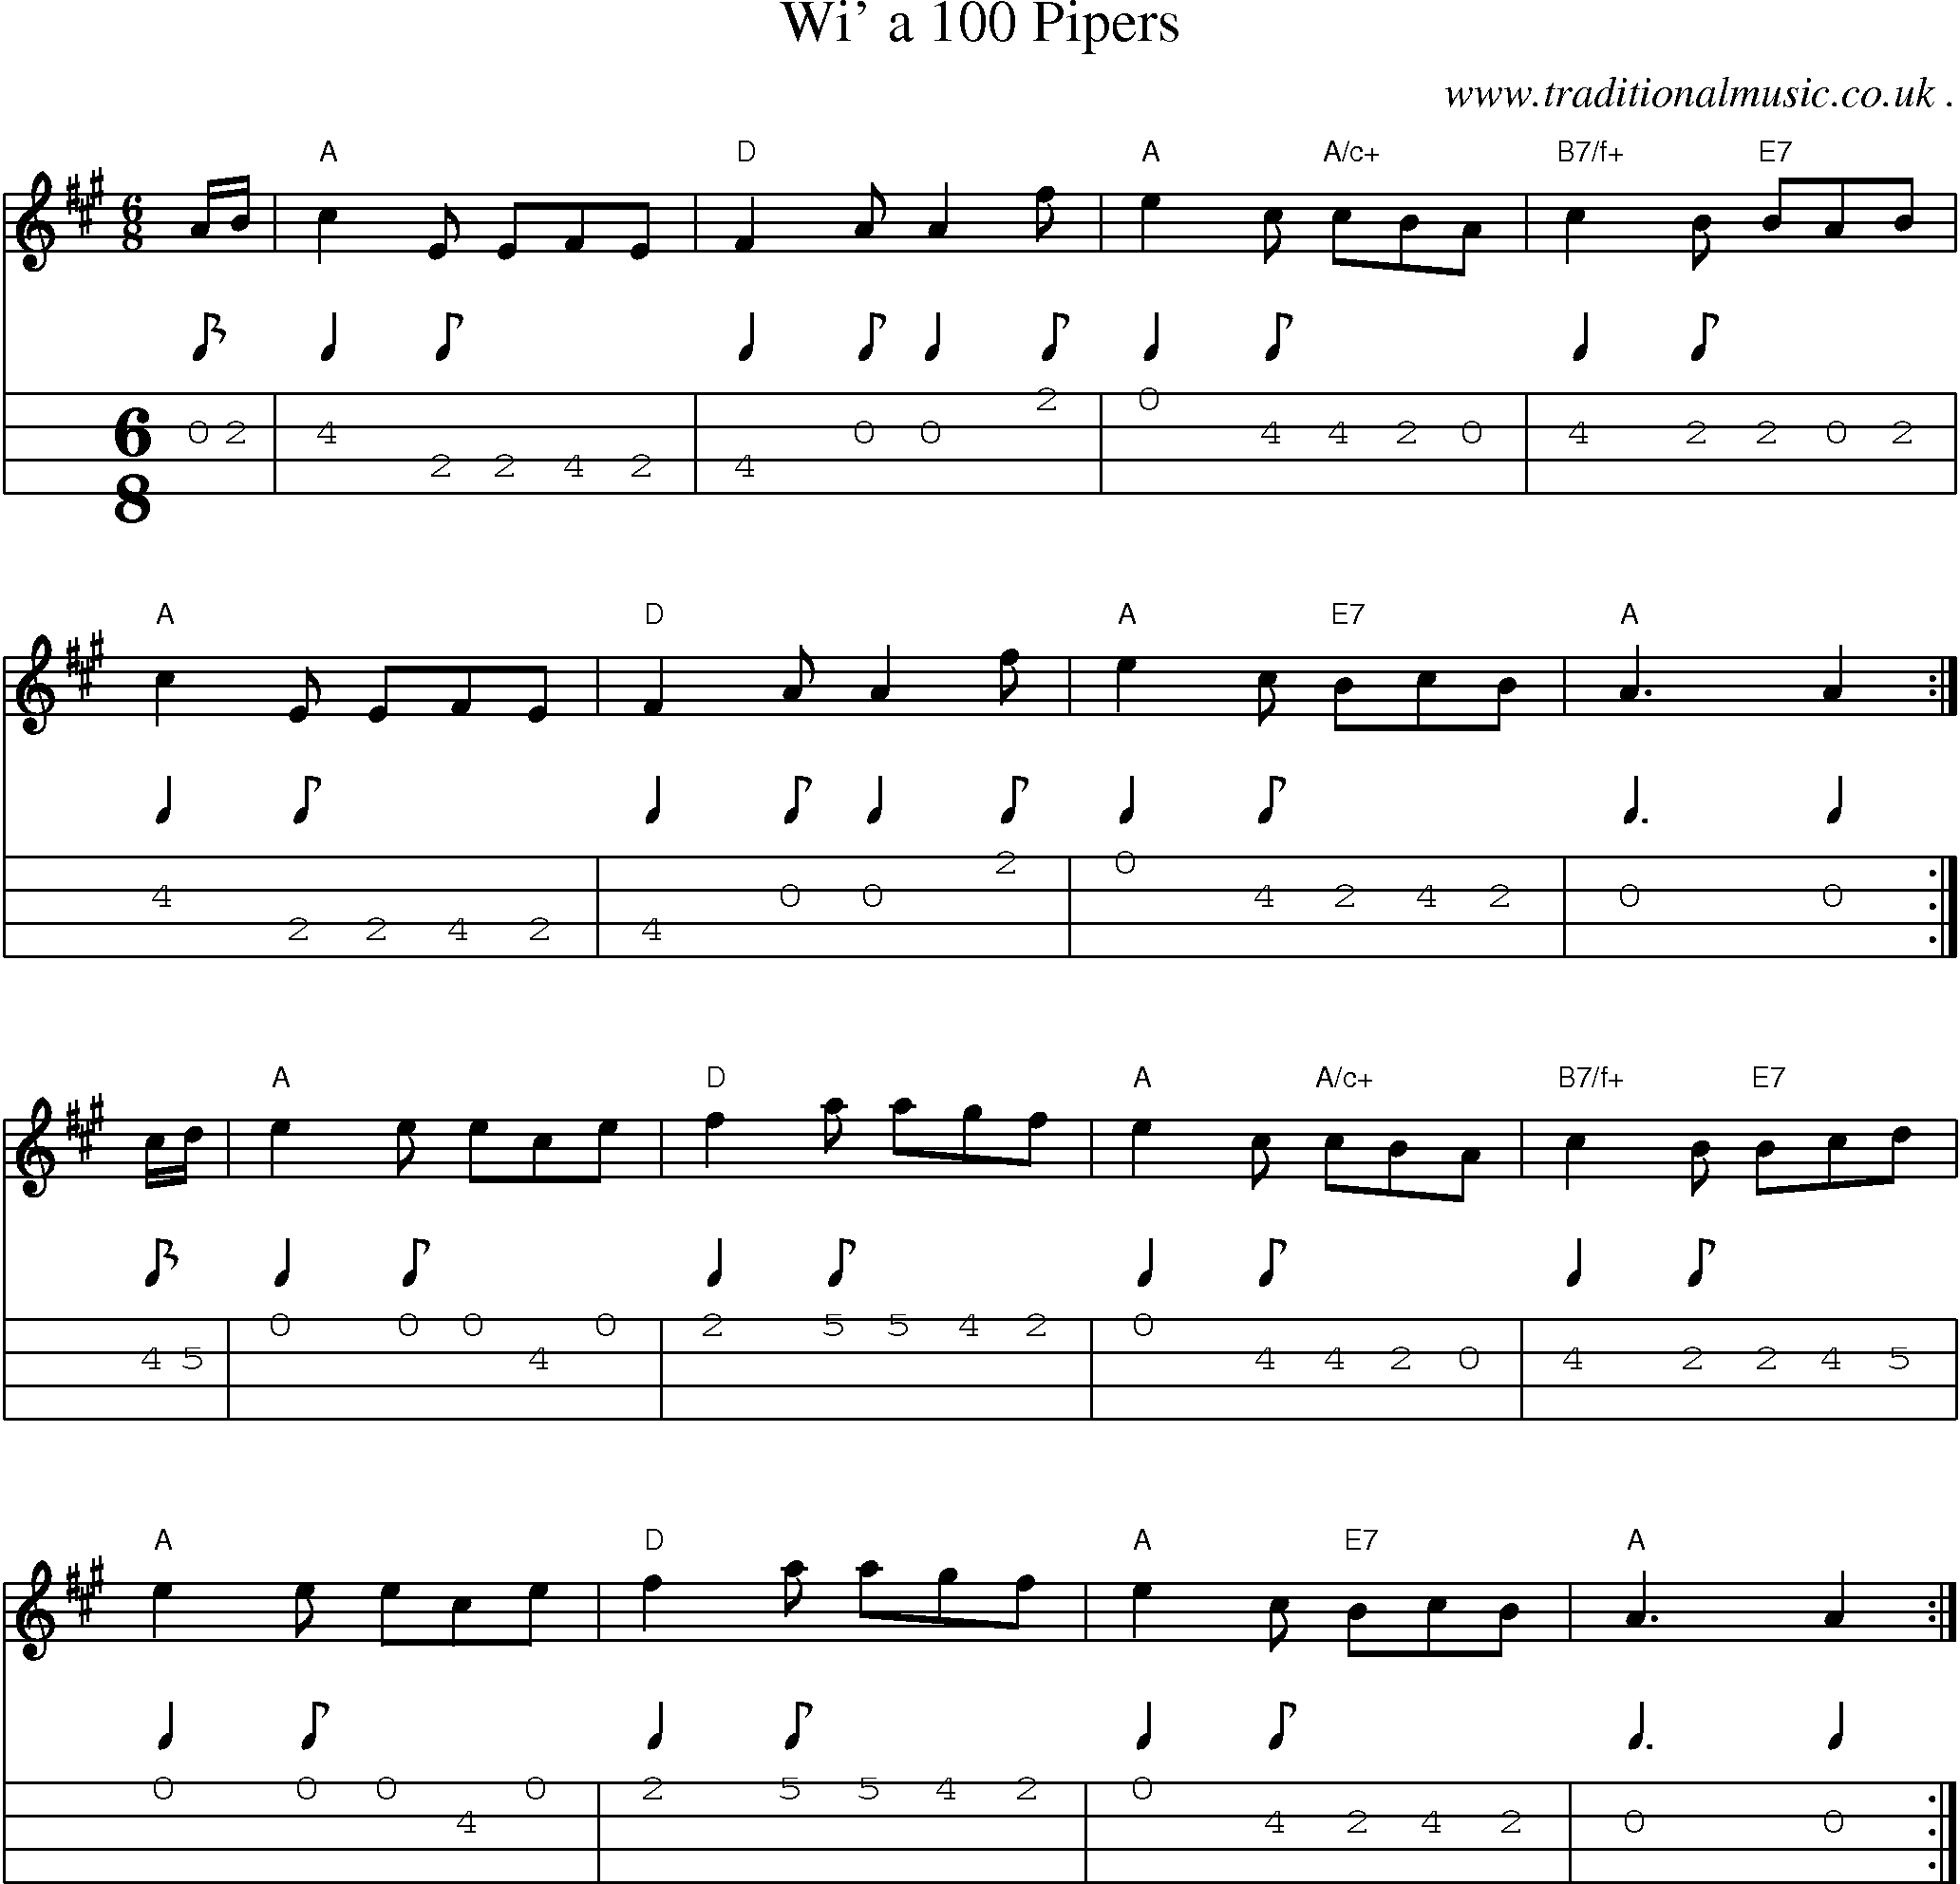 Sheet-music  score, Chords and Mandolin Tabs for Wi A 100 Pipers